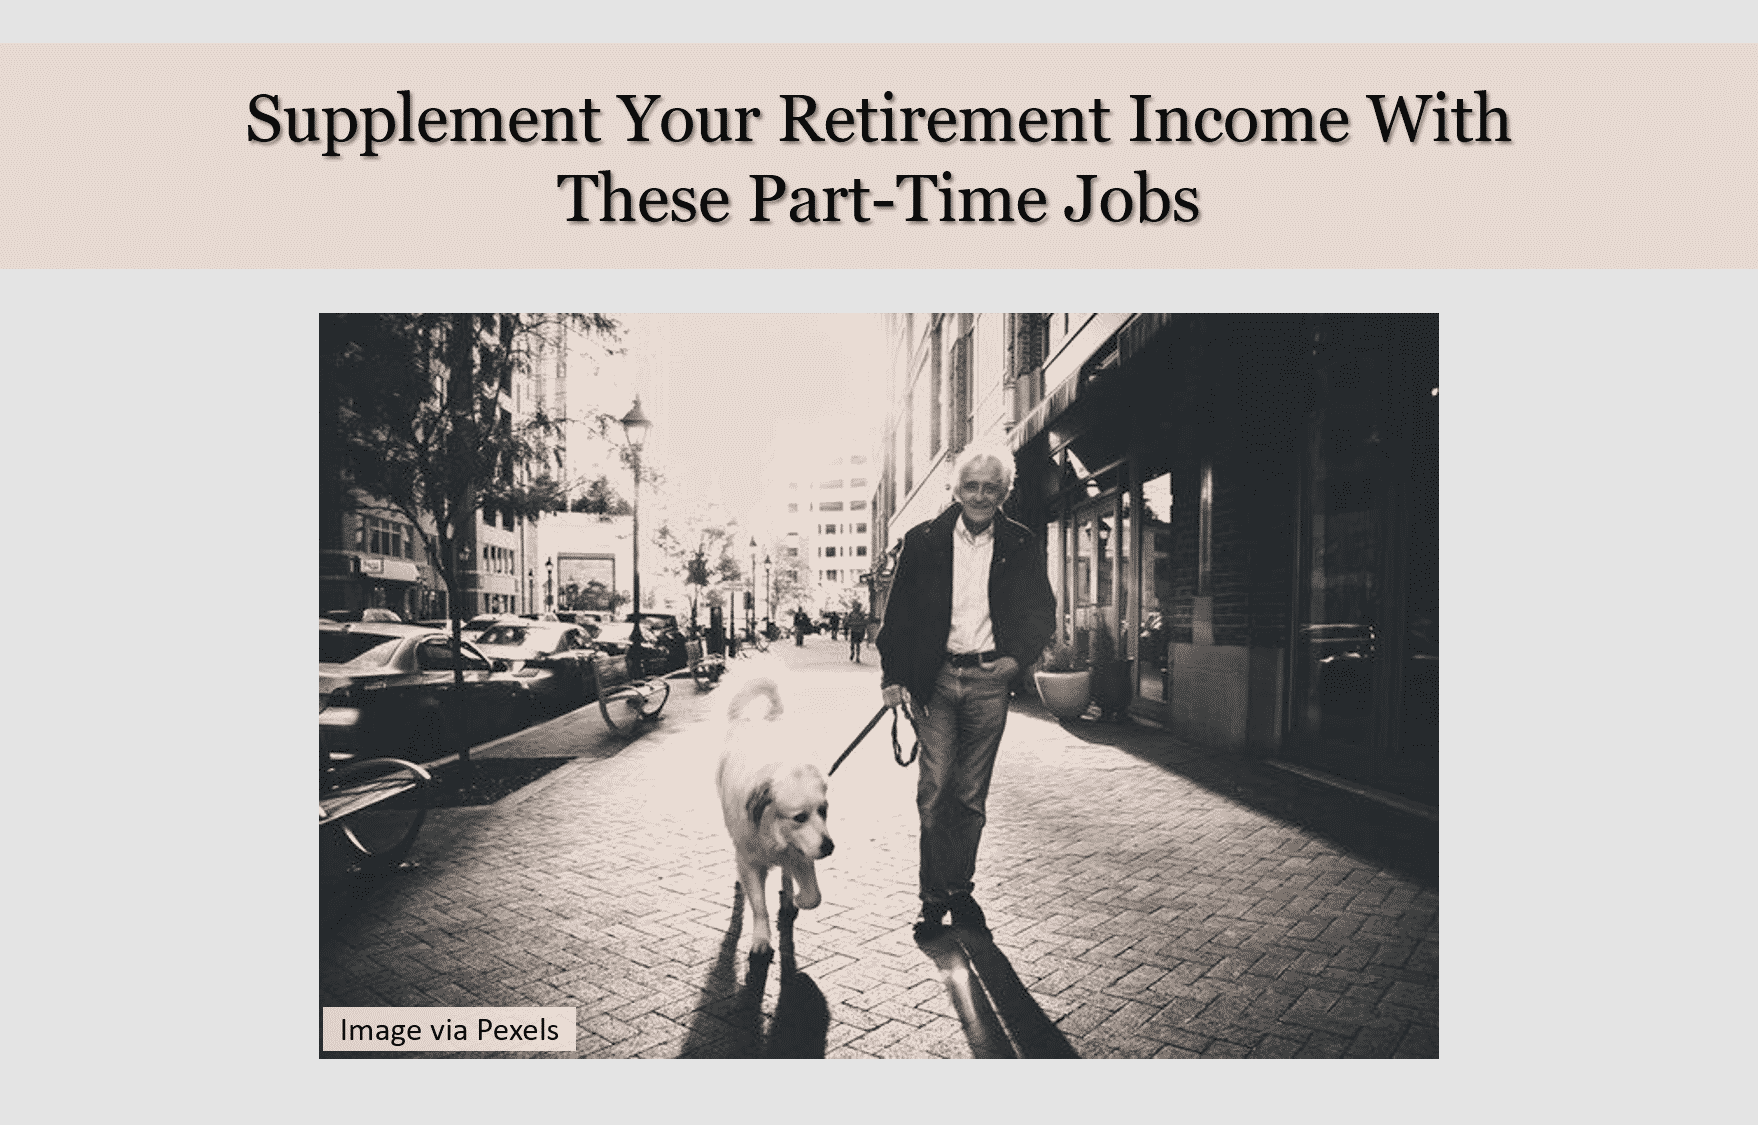 Supplement Your Retirement Income With These Part-Time Jobs. Guest Blog by Marie Villeza